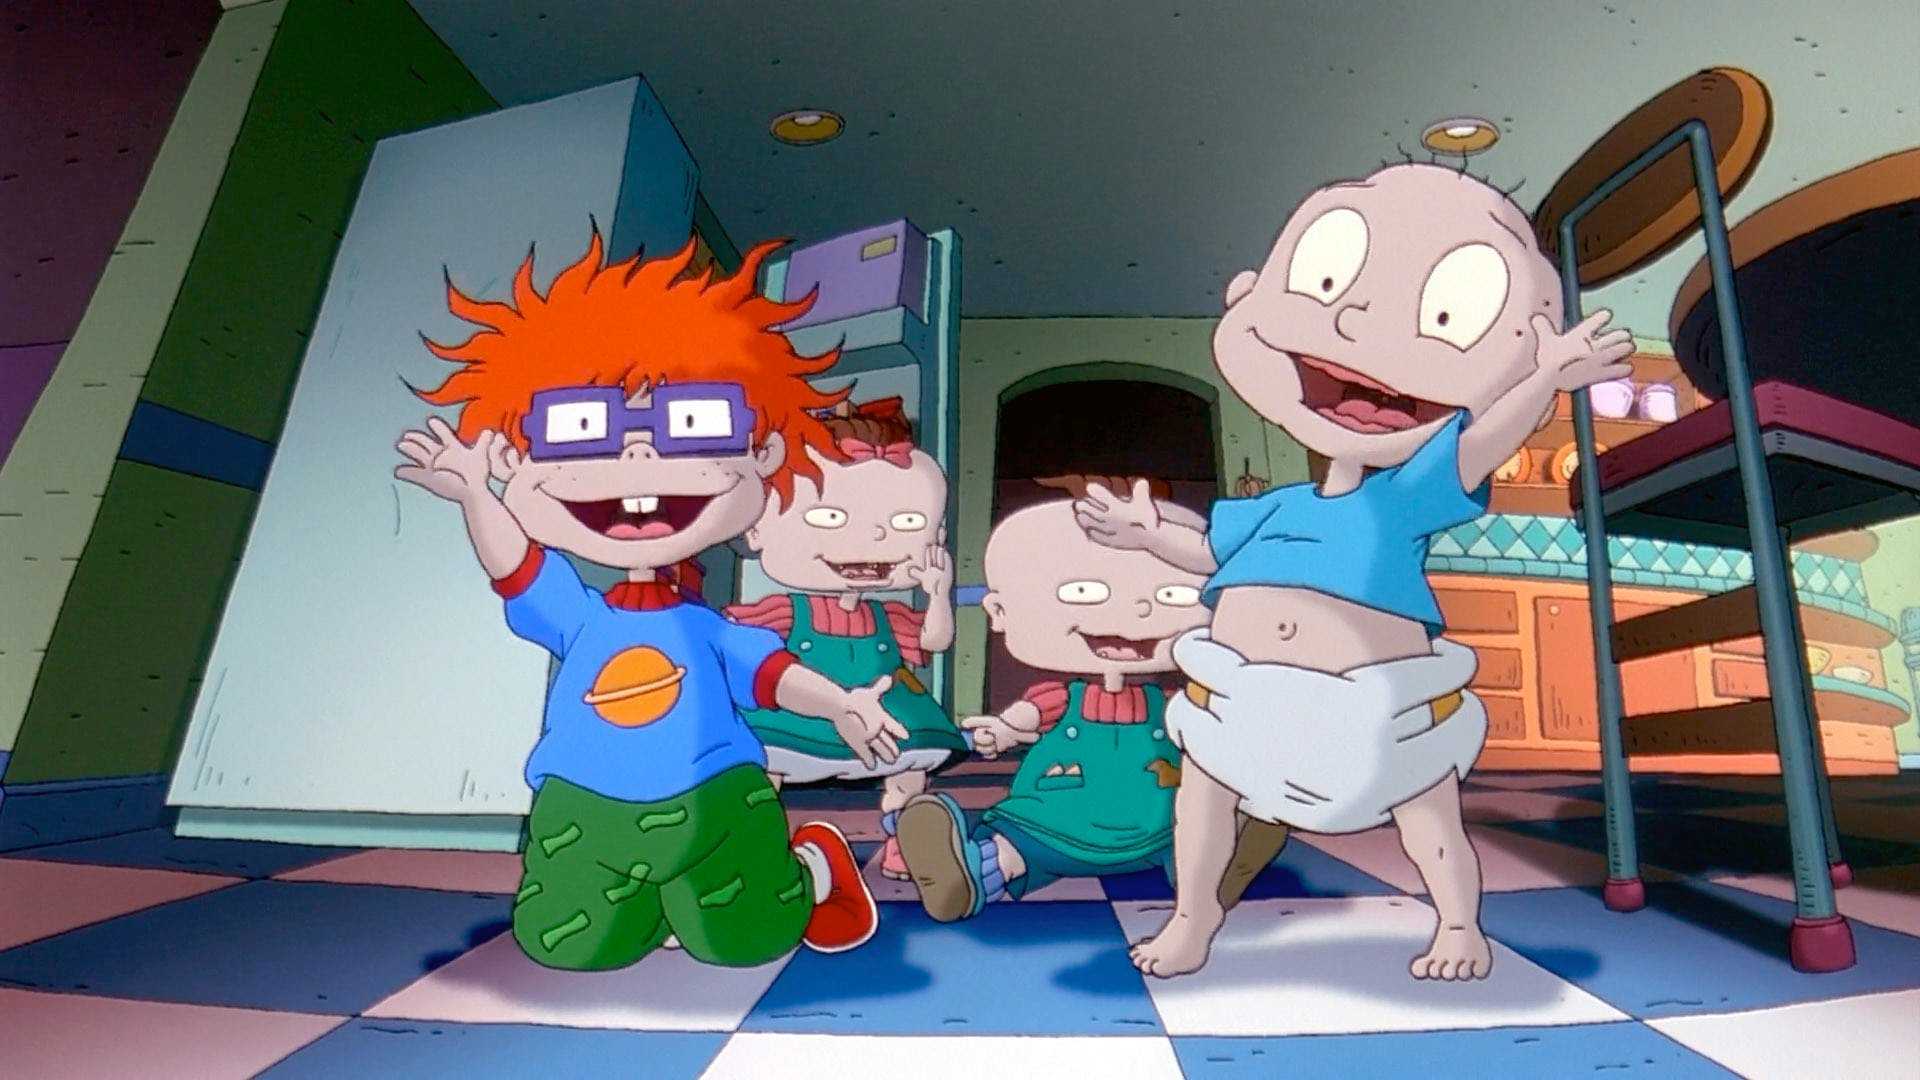 Rugrats Series Reboot In The Works Along With A Live Action Cgi Hybrid Movie With Presumably